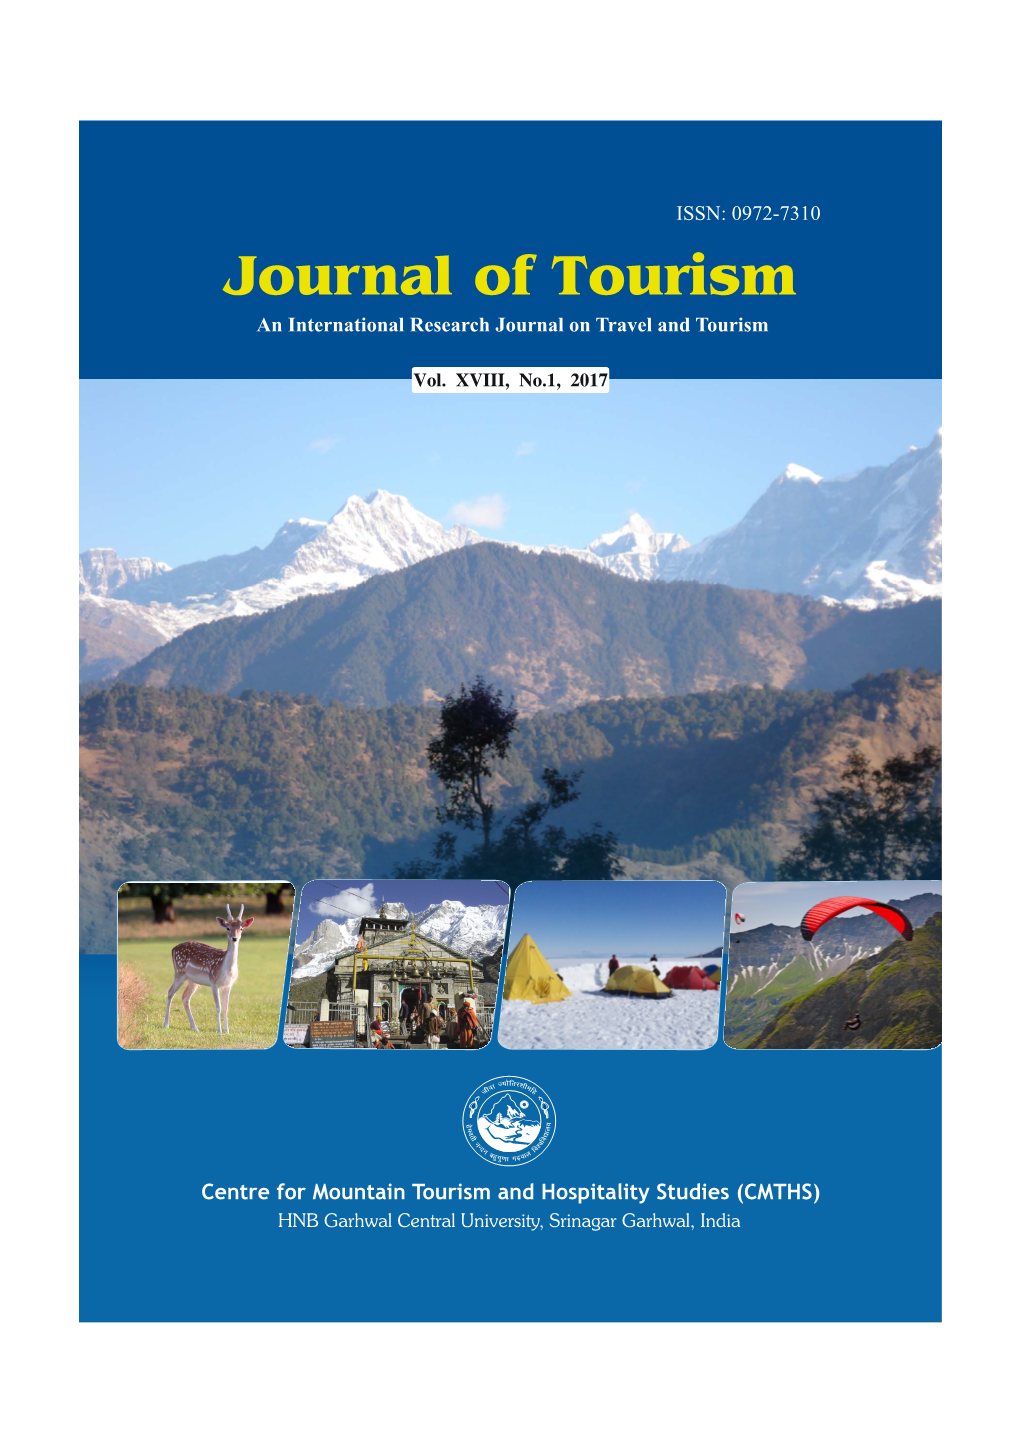 Sustainable Entrepreneurship Development Practices in Tourism and Hospitality Sector in the Himalayan States